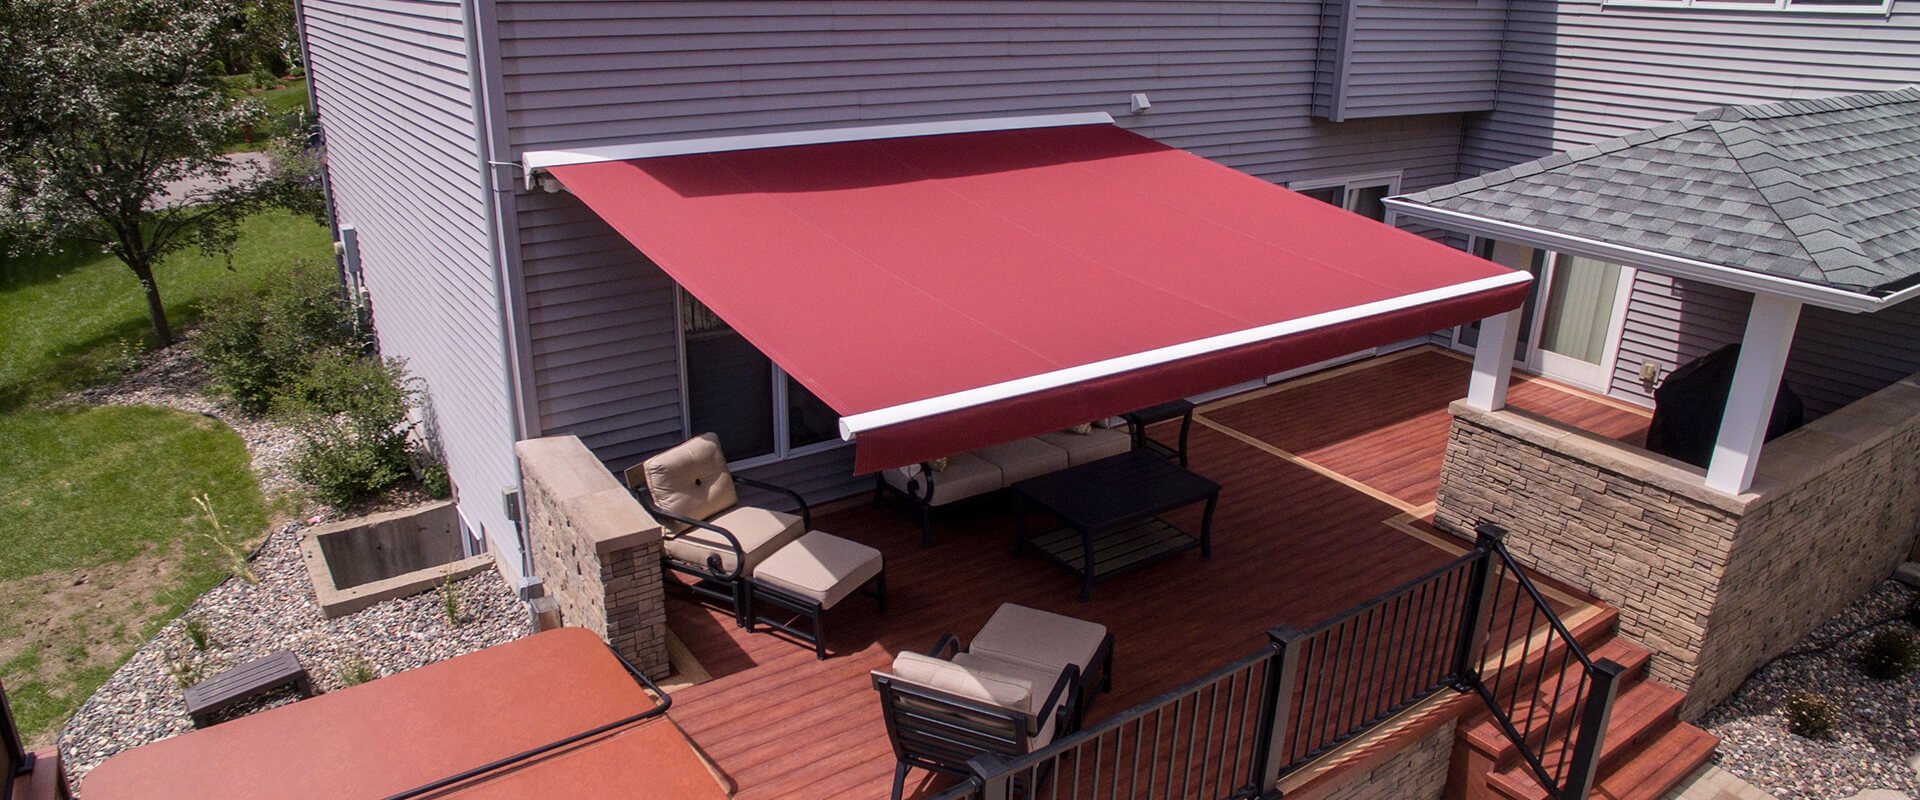 The Ultimate Guide to Retractable Awnings-Benefits They Offer, Best Products to Buy, & More!